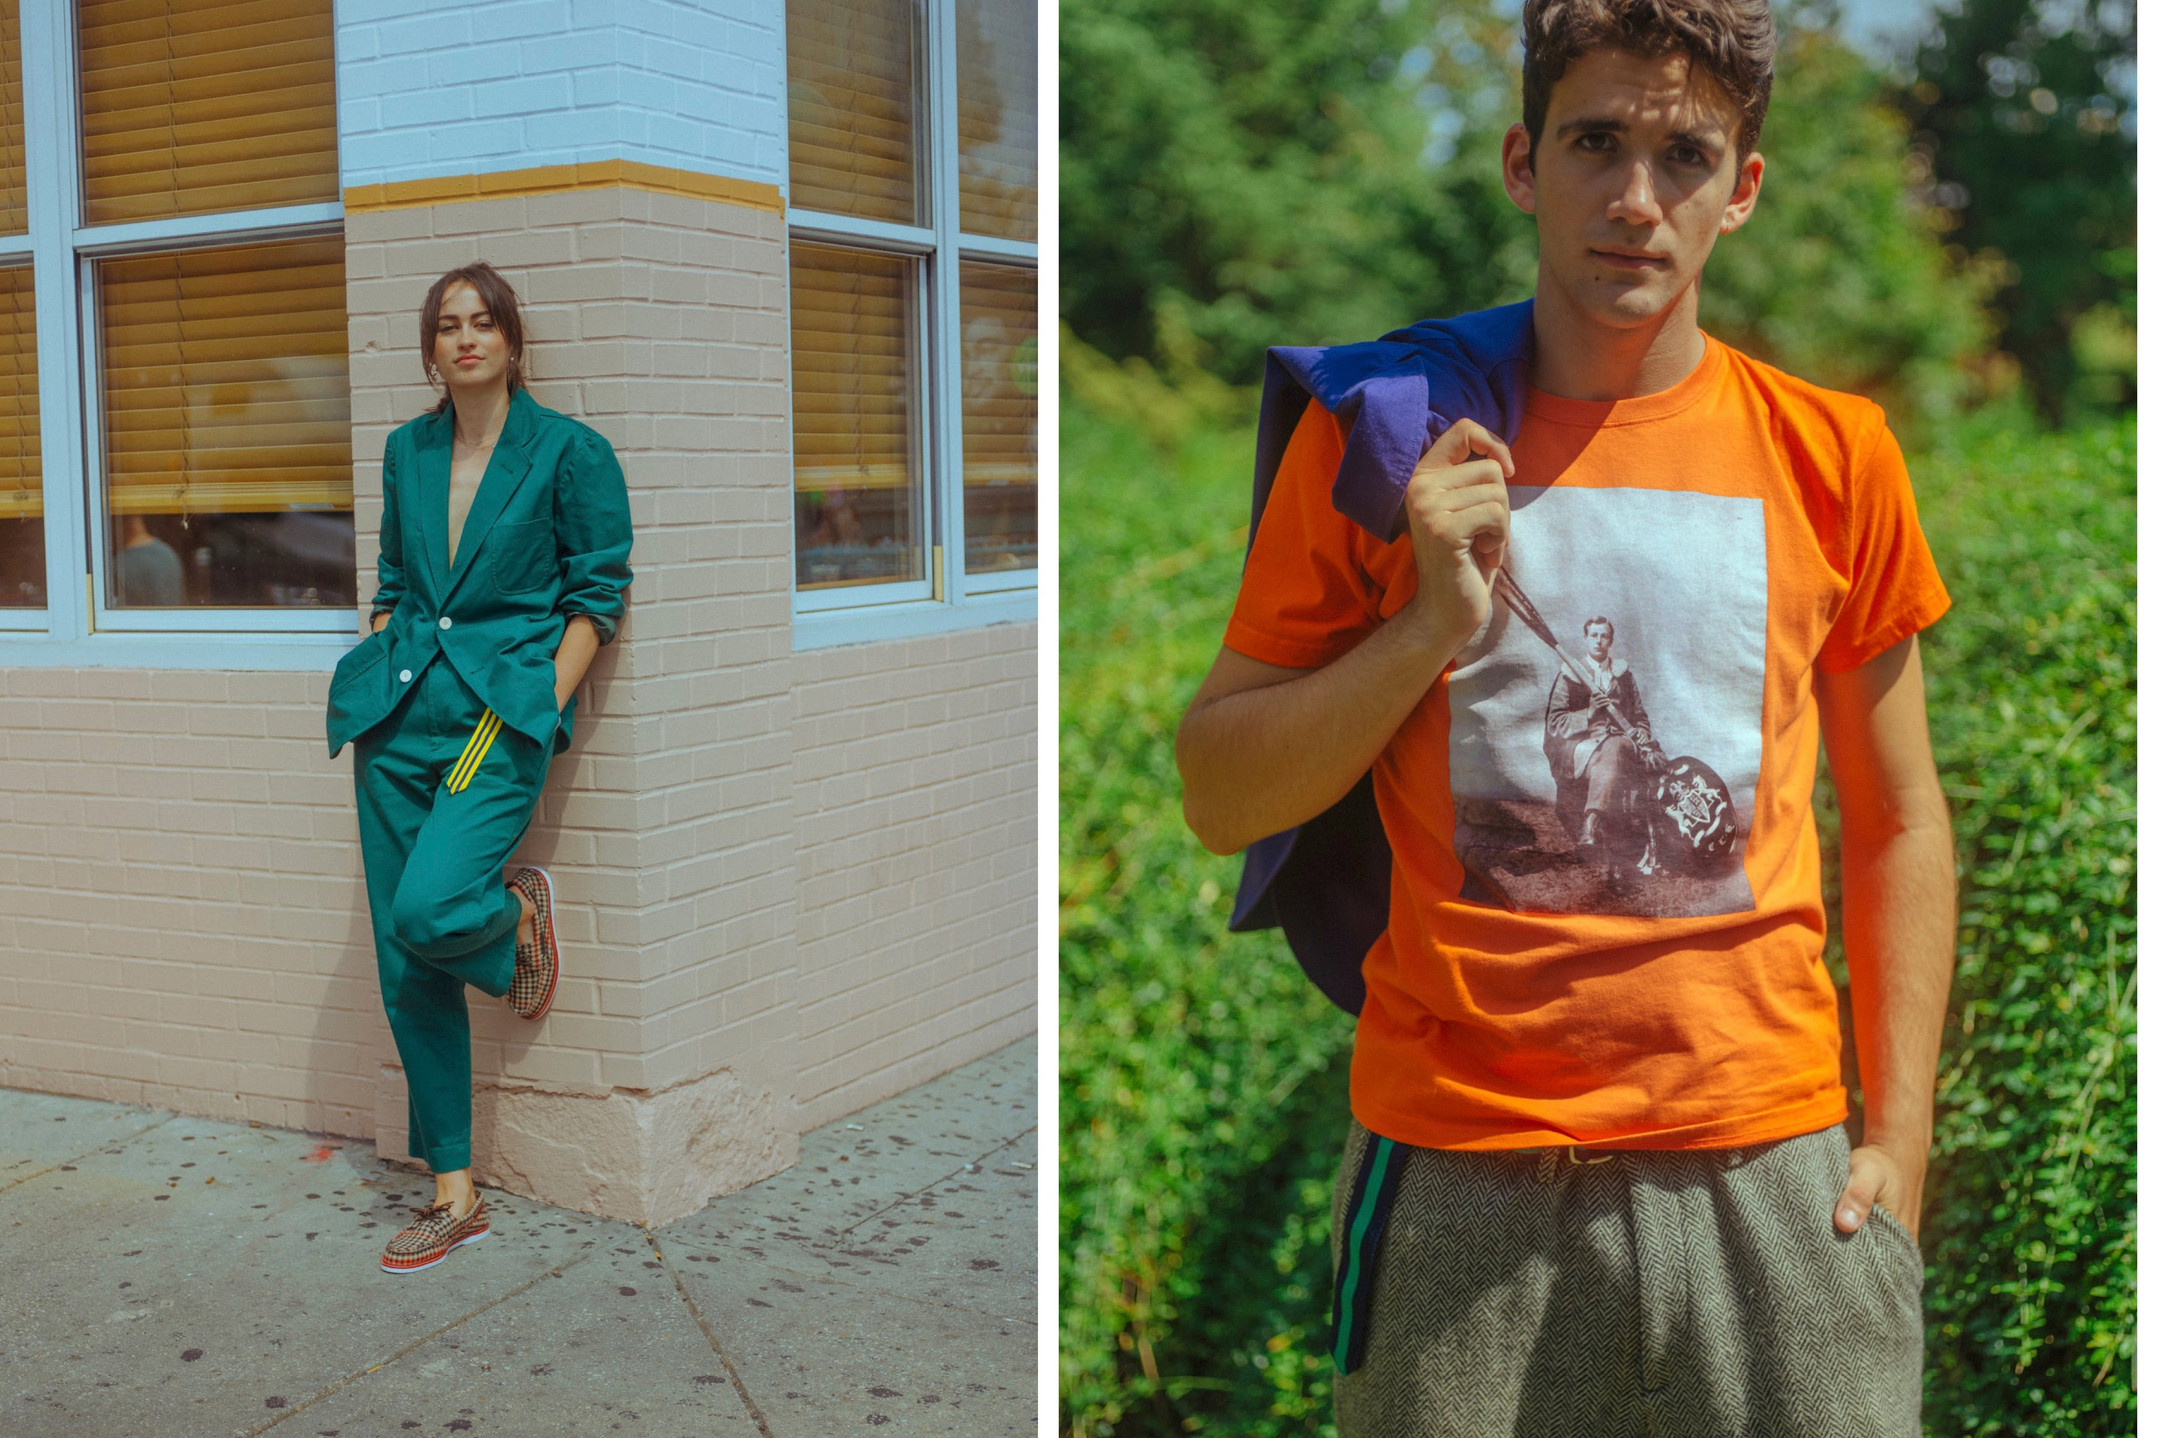 Female model wearing the Cotton Twill Tailored Trousers in green and the Grosgrain Belt in navy and yellow. Male model wearing the Wooden Spoon Tee in orange and the Grosgrain Belt in navy and green